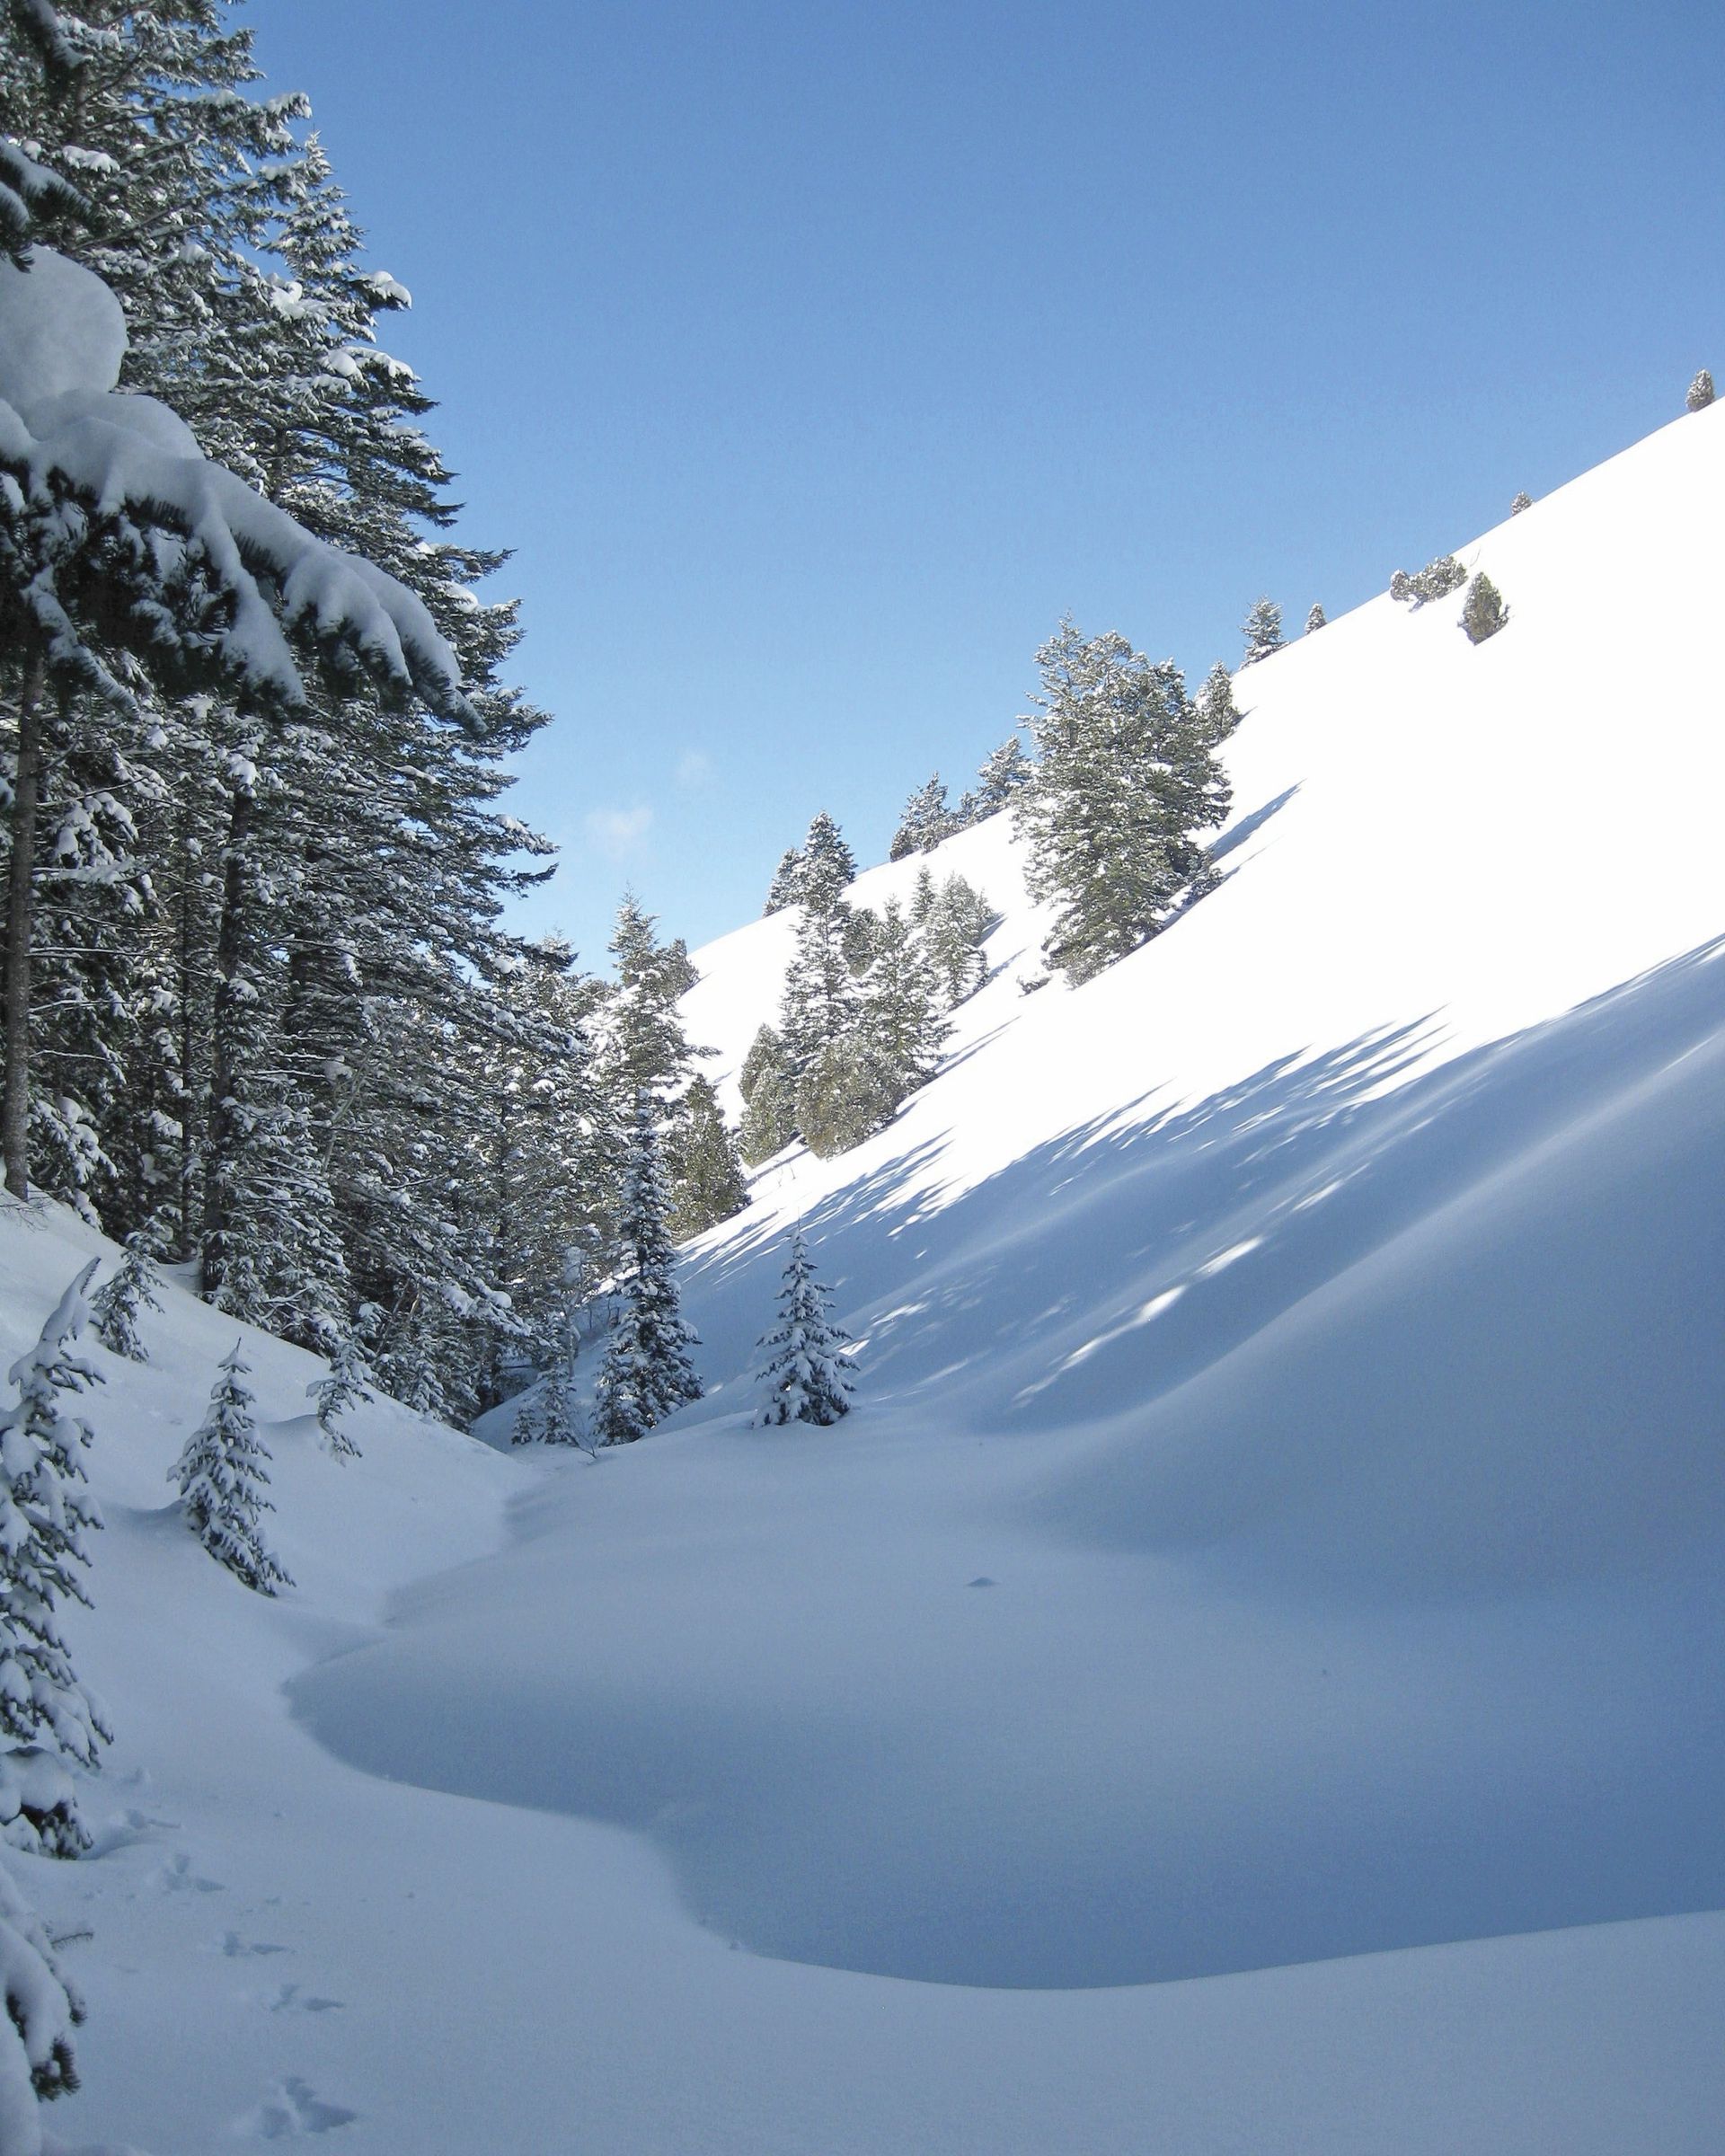 A hill covered in snow with trees at the bottom.